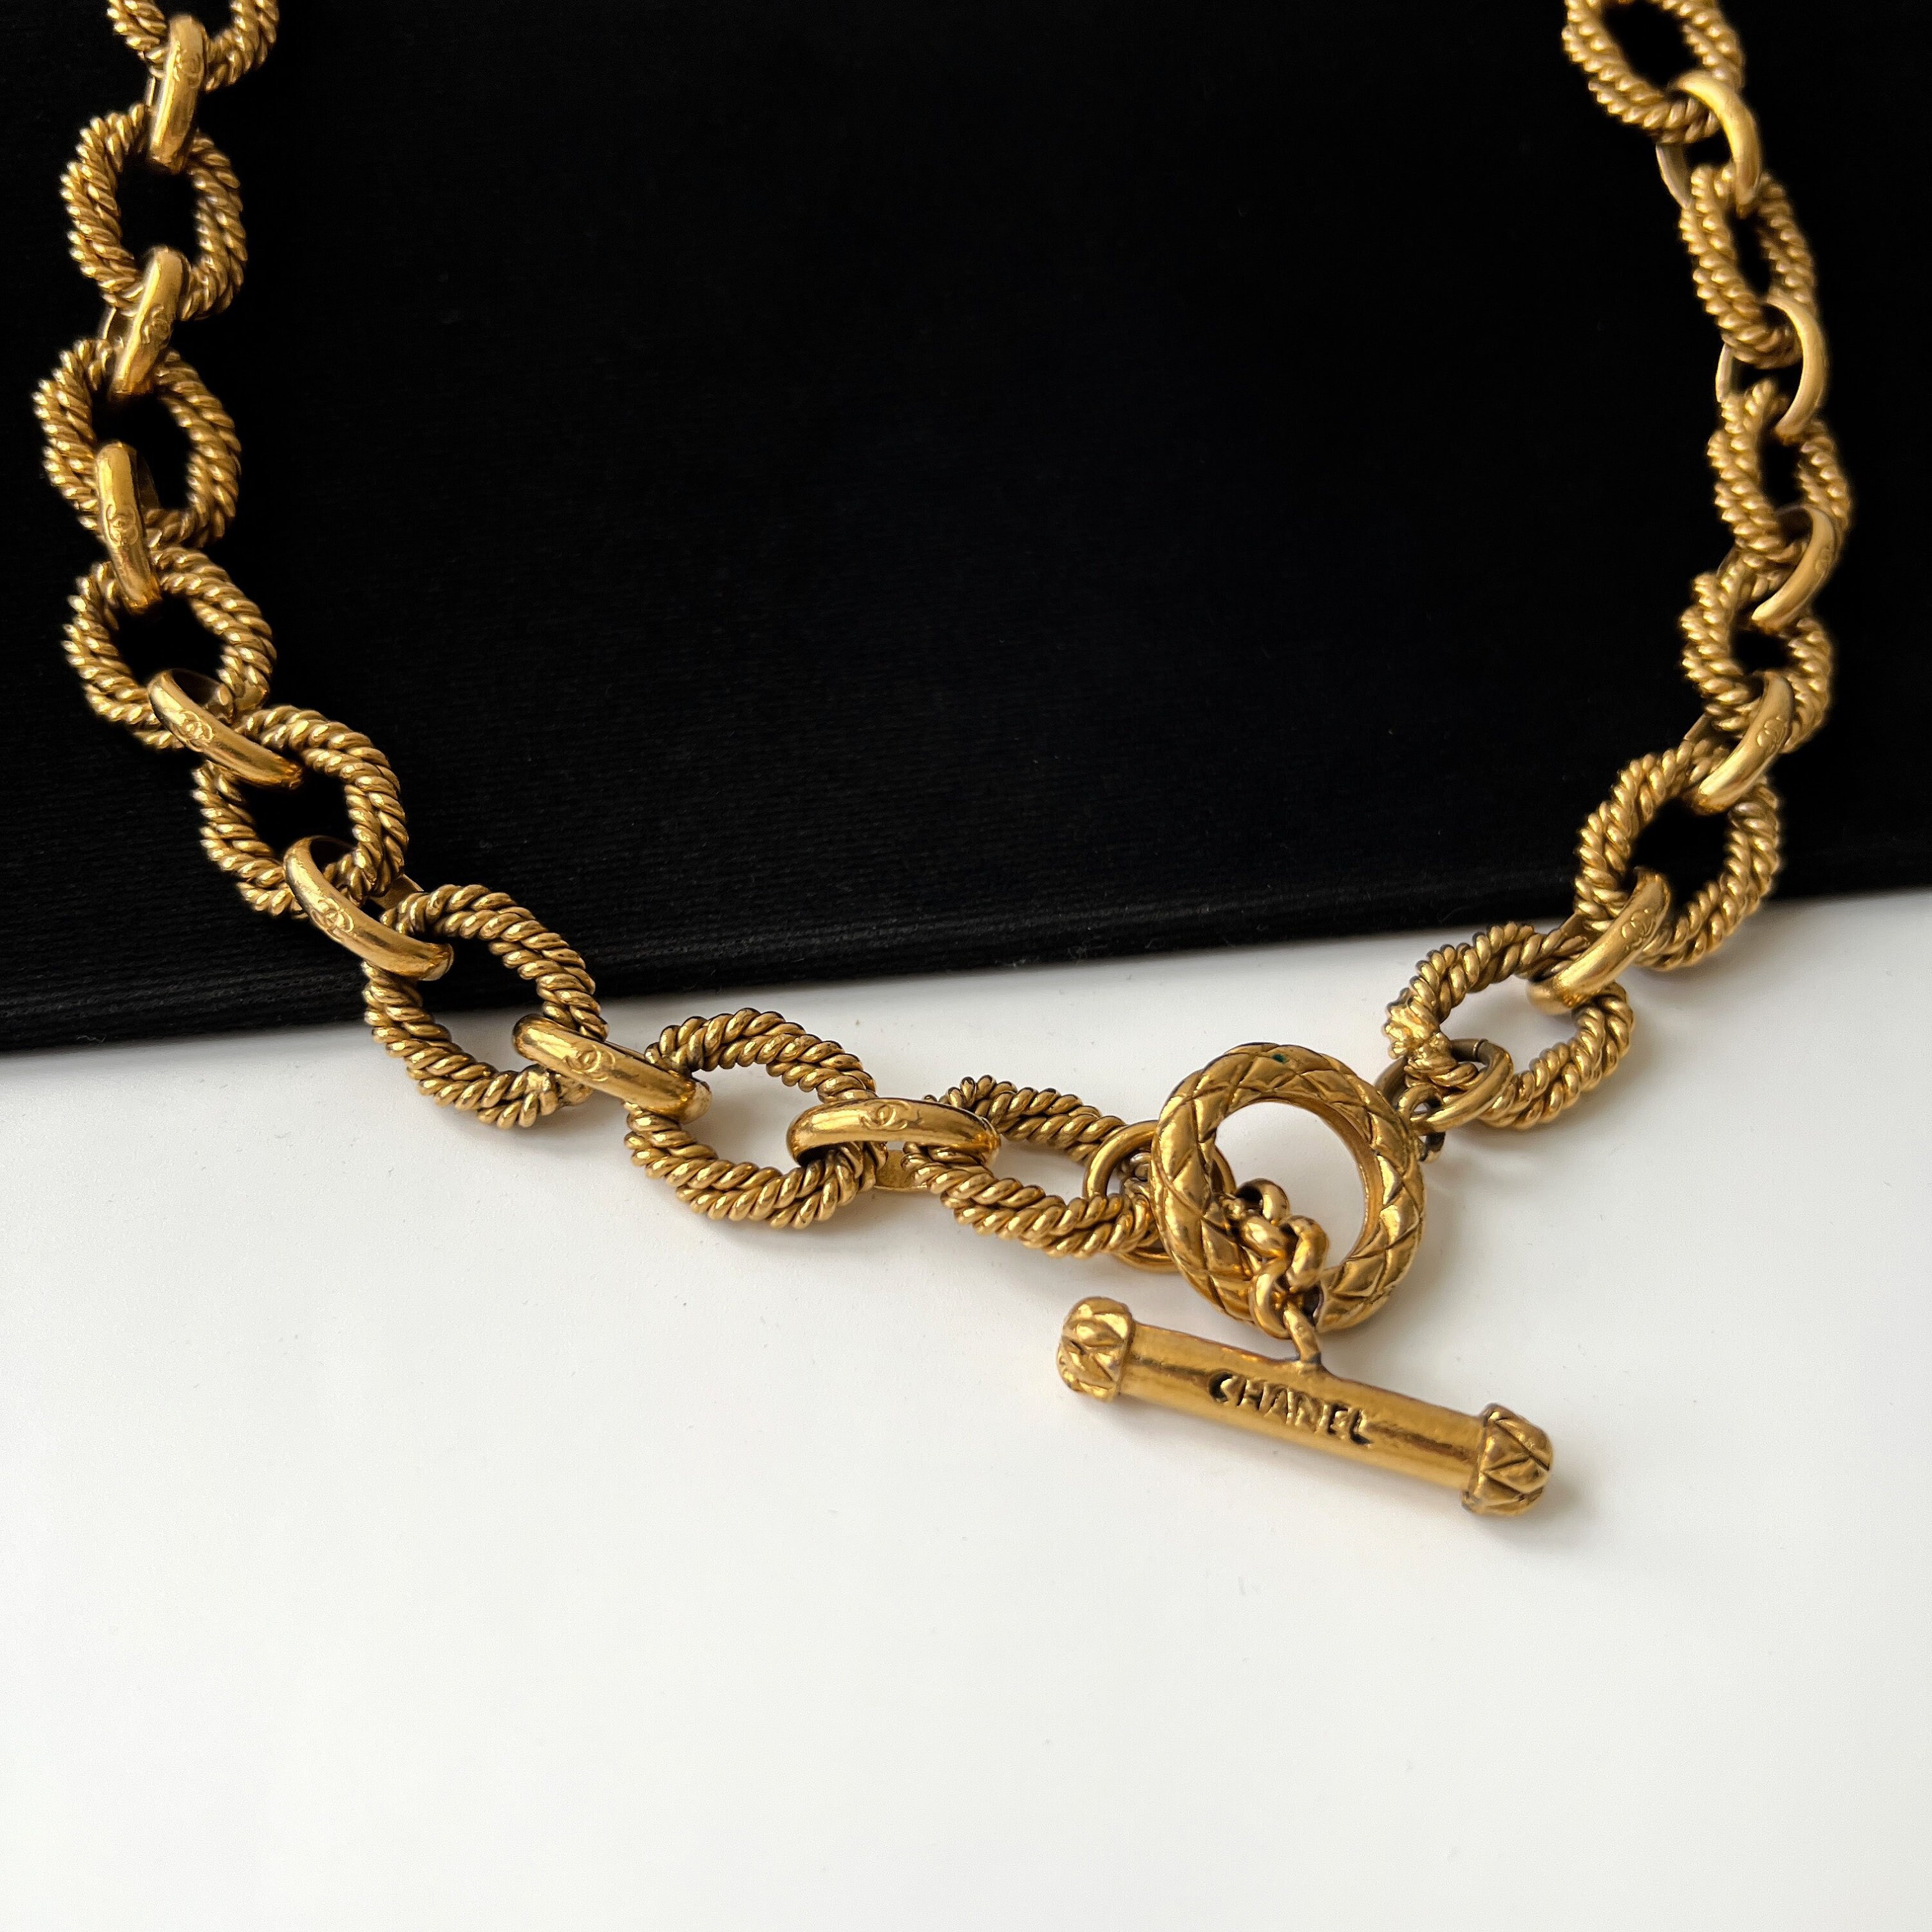 Poured Glass Iconic Cross Necklace, Chanel